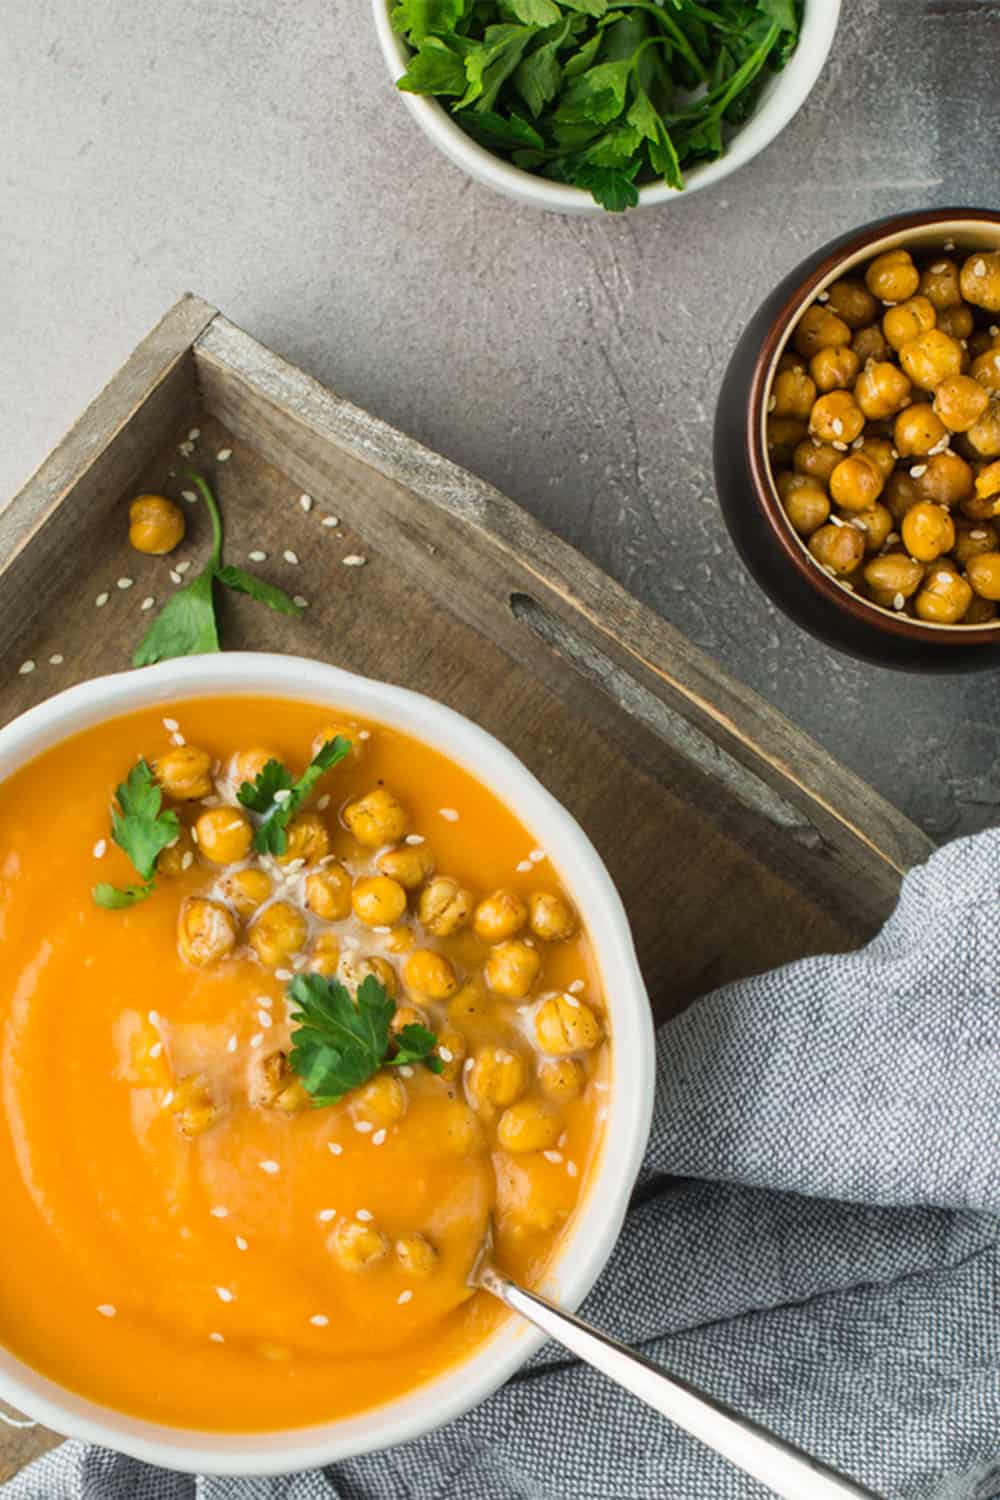 Chickpea Soup With Hazelnut Oil Toasts Recipe